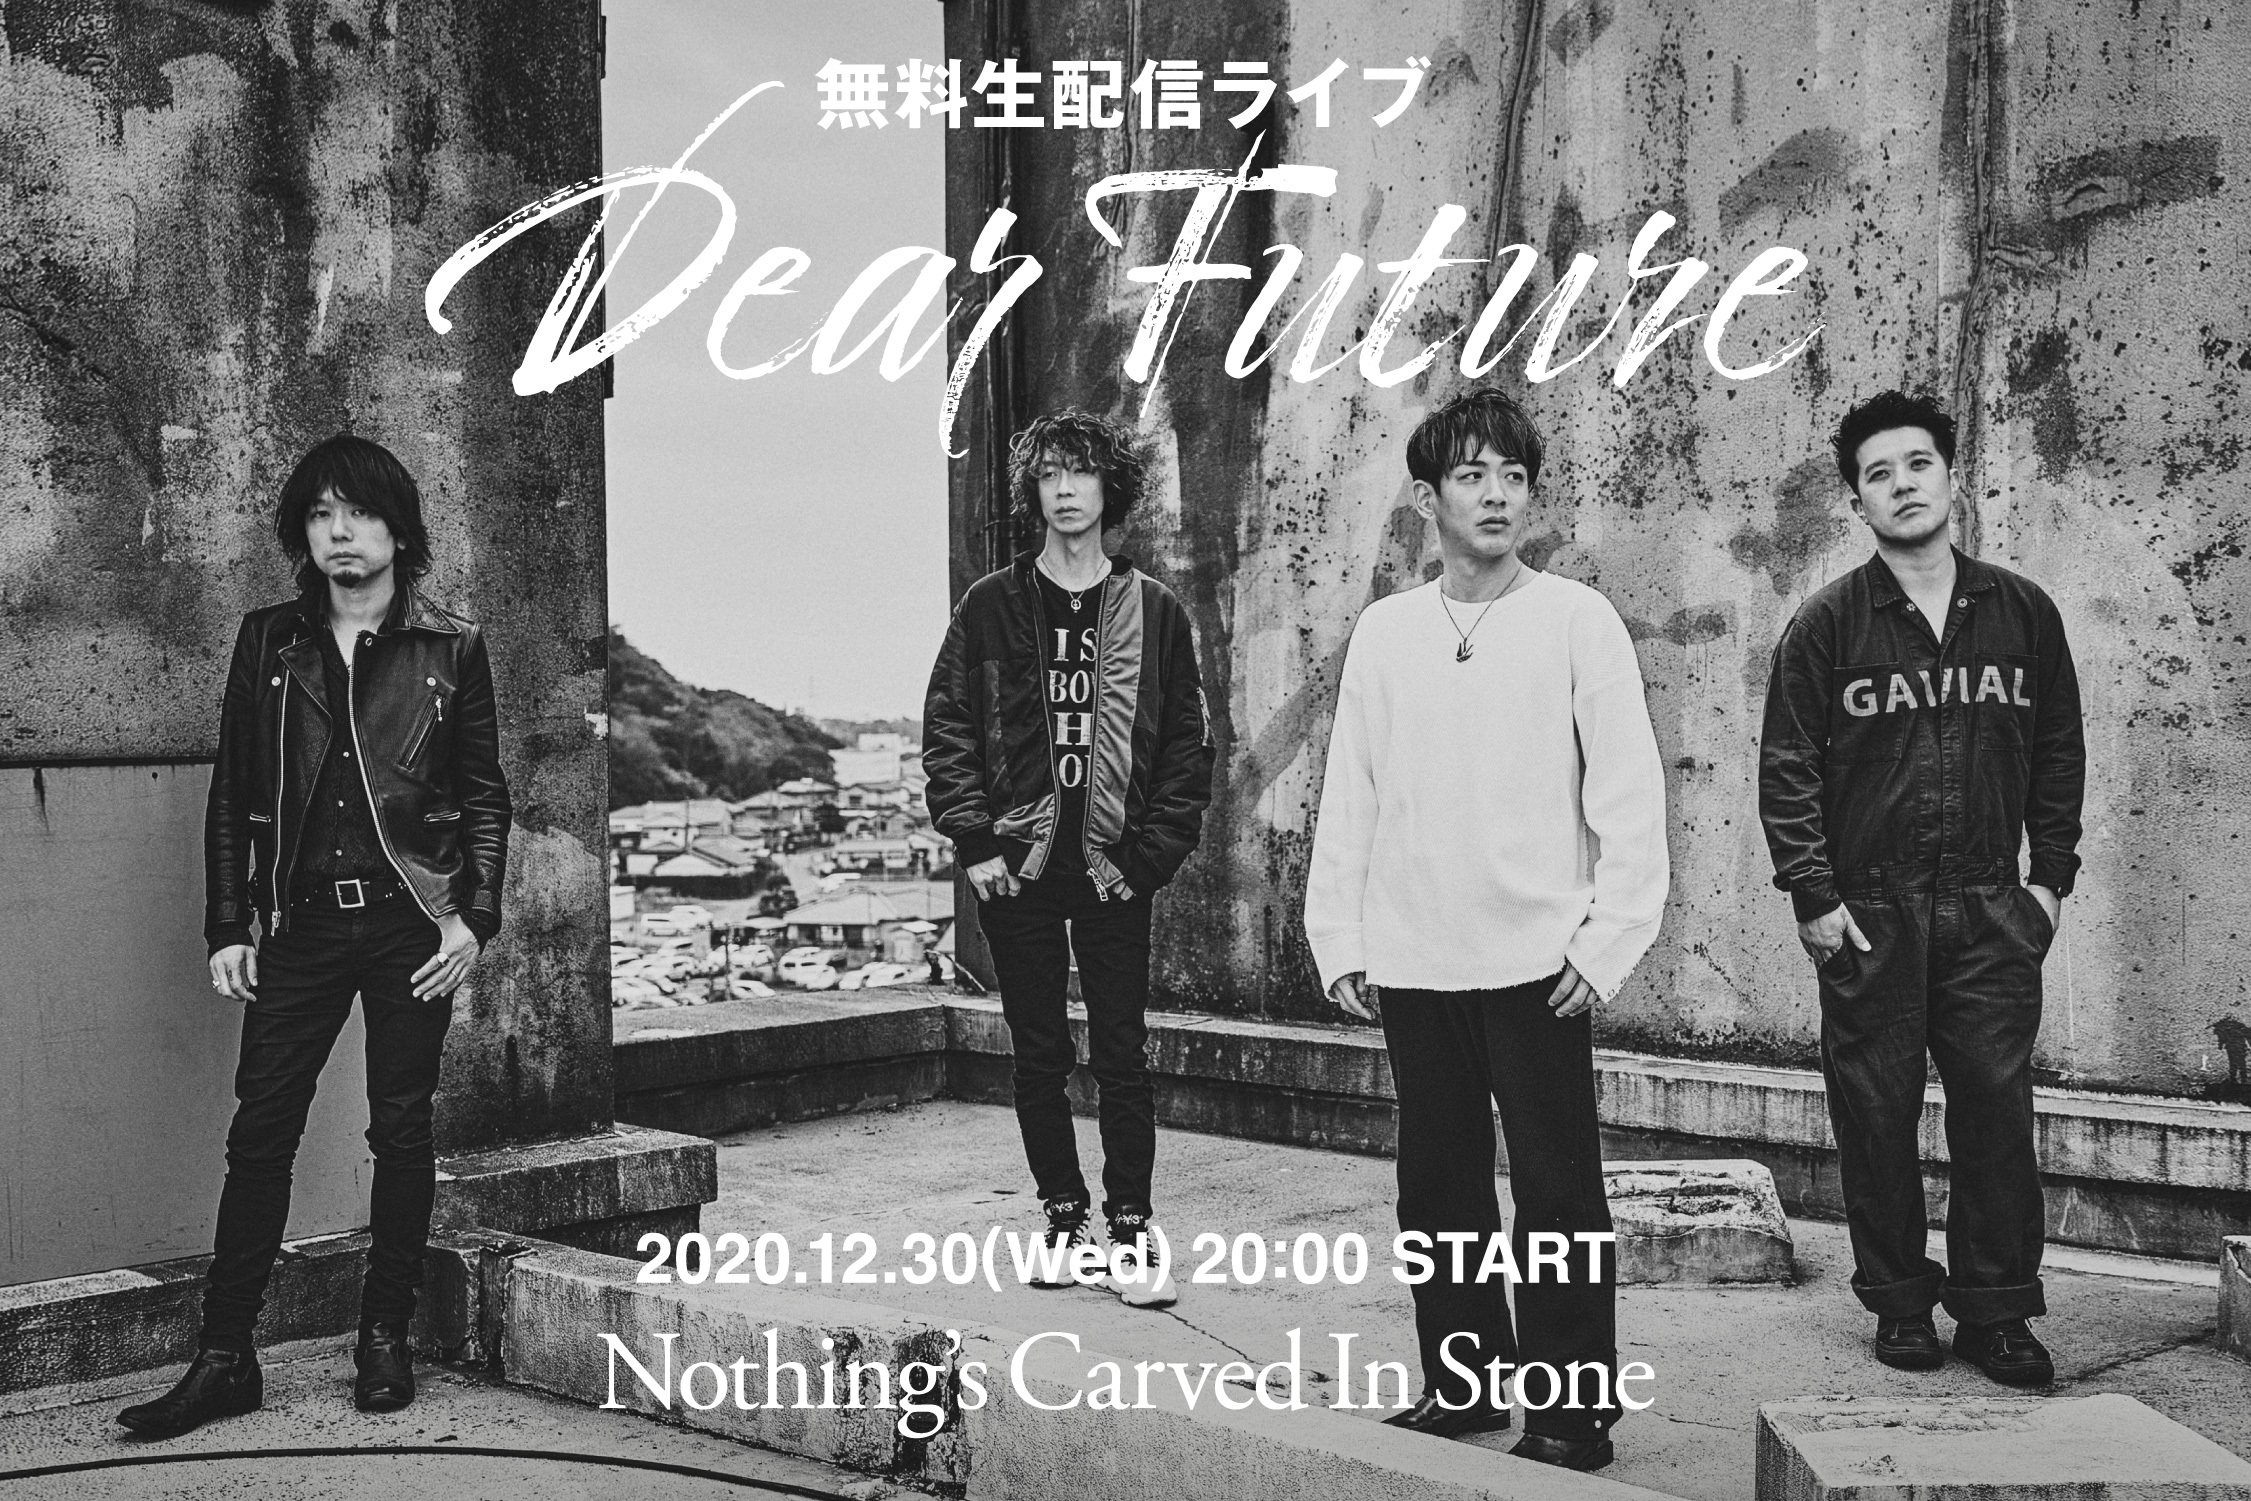 Nothing's Carved In Stone 無料生配信ライブ告知